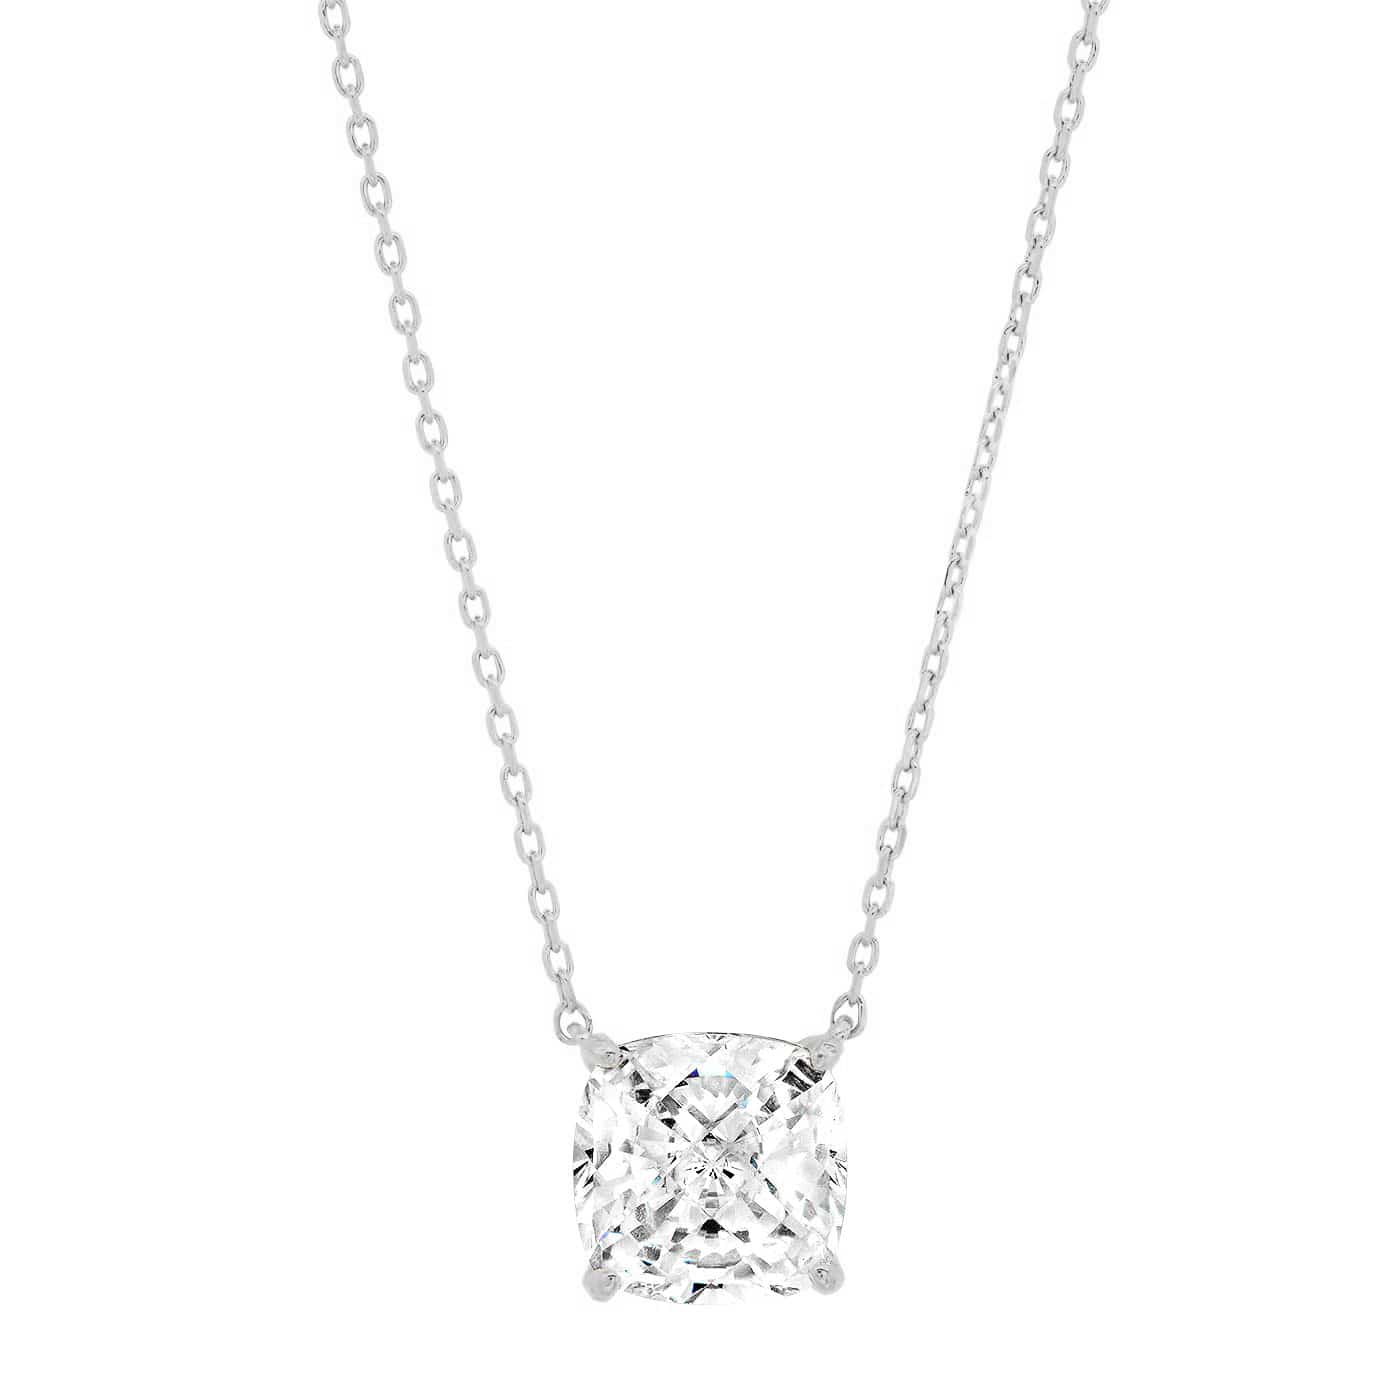 TAI JEWELRY Necklace Sterling Silver Simple Chain Necklace With Cushion Cut CZ